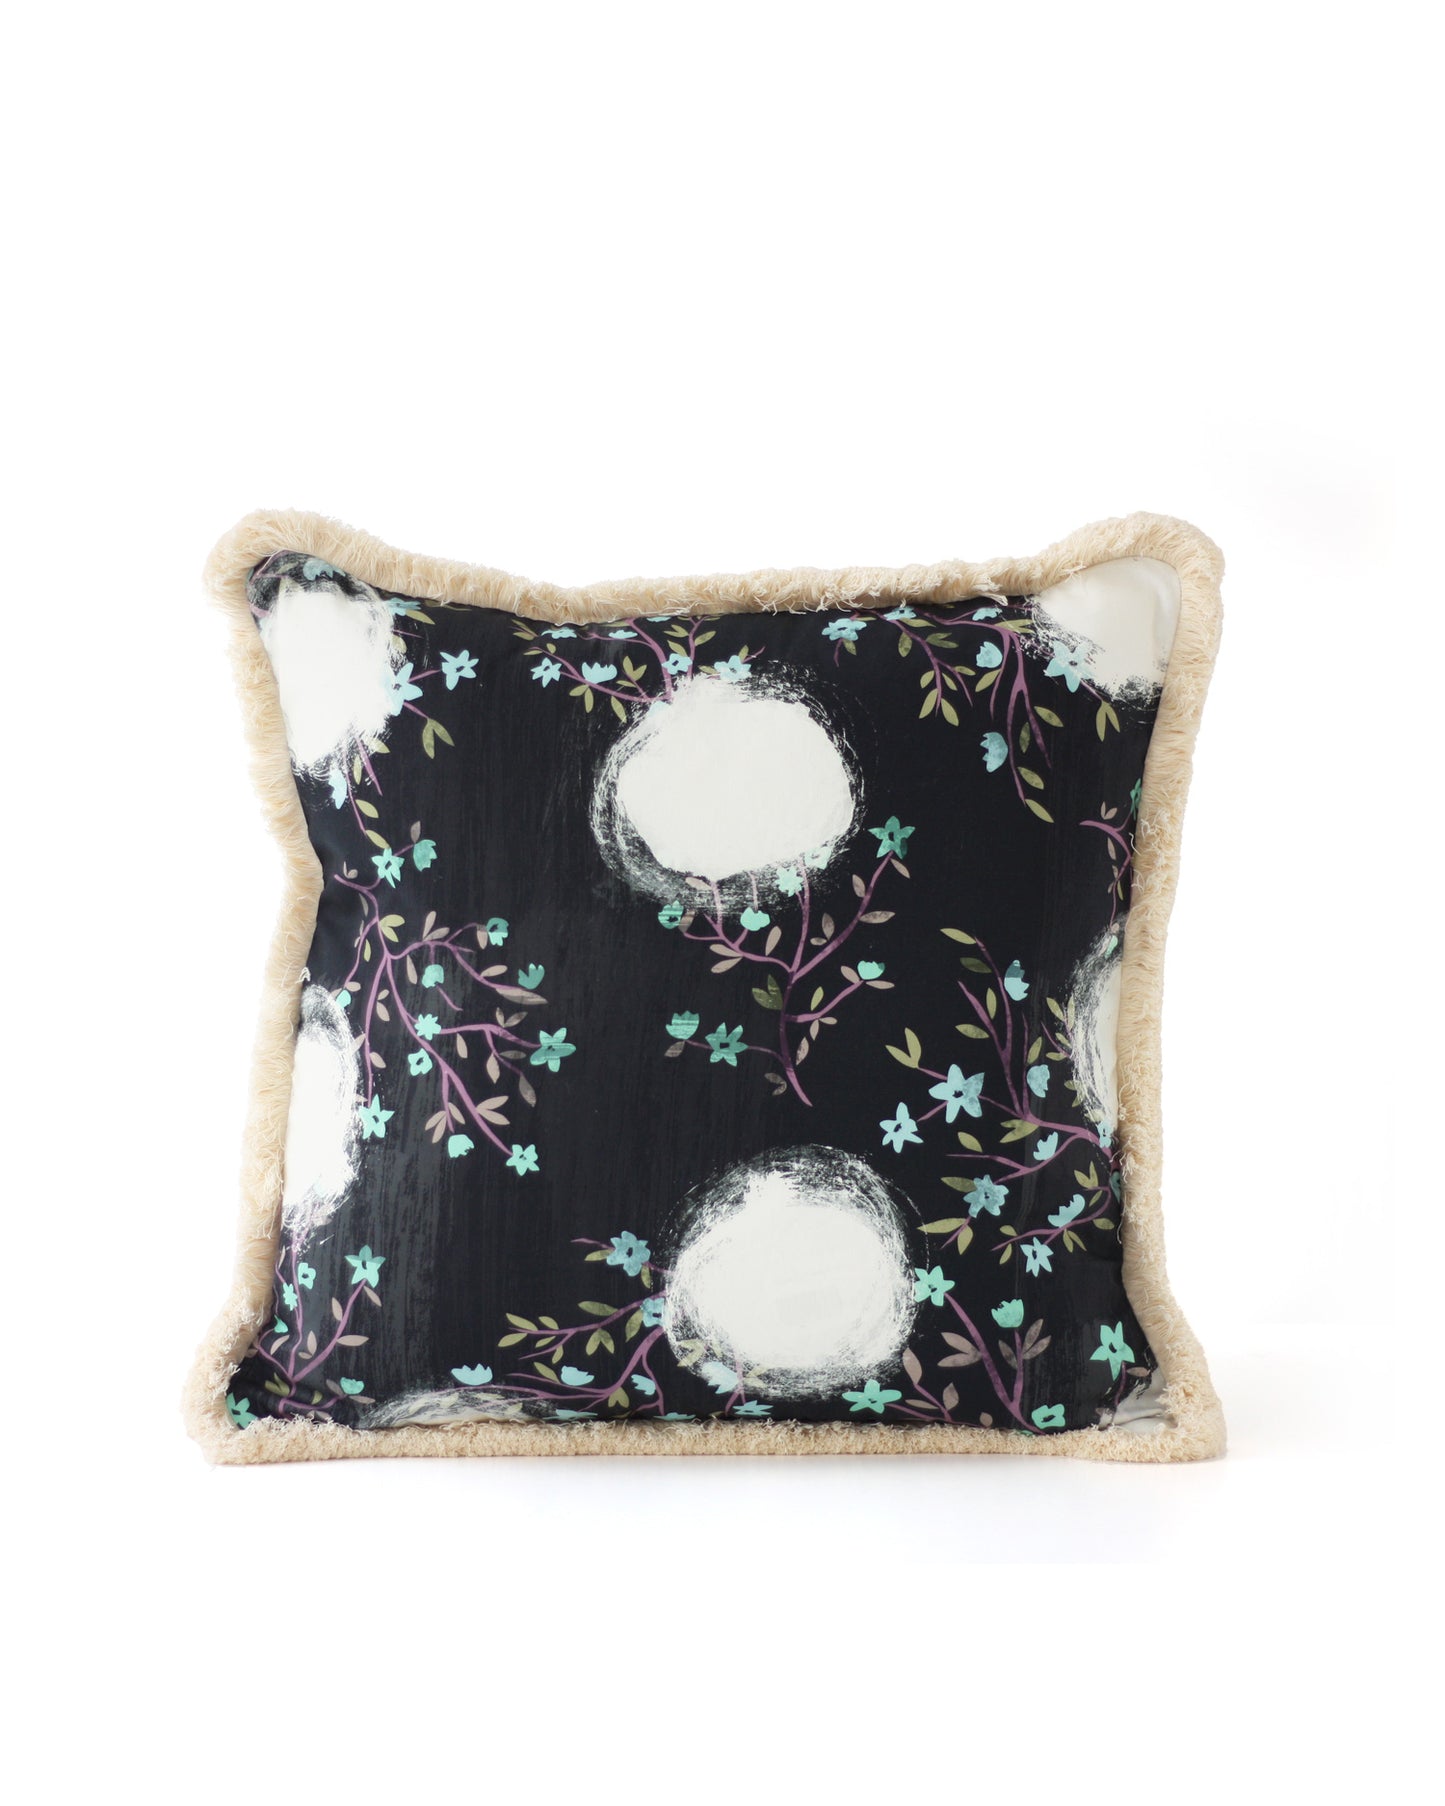 JAPANDI cushion for unique home decor and home styling